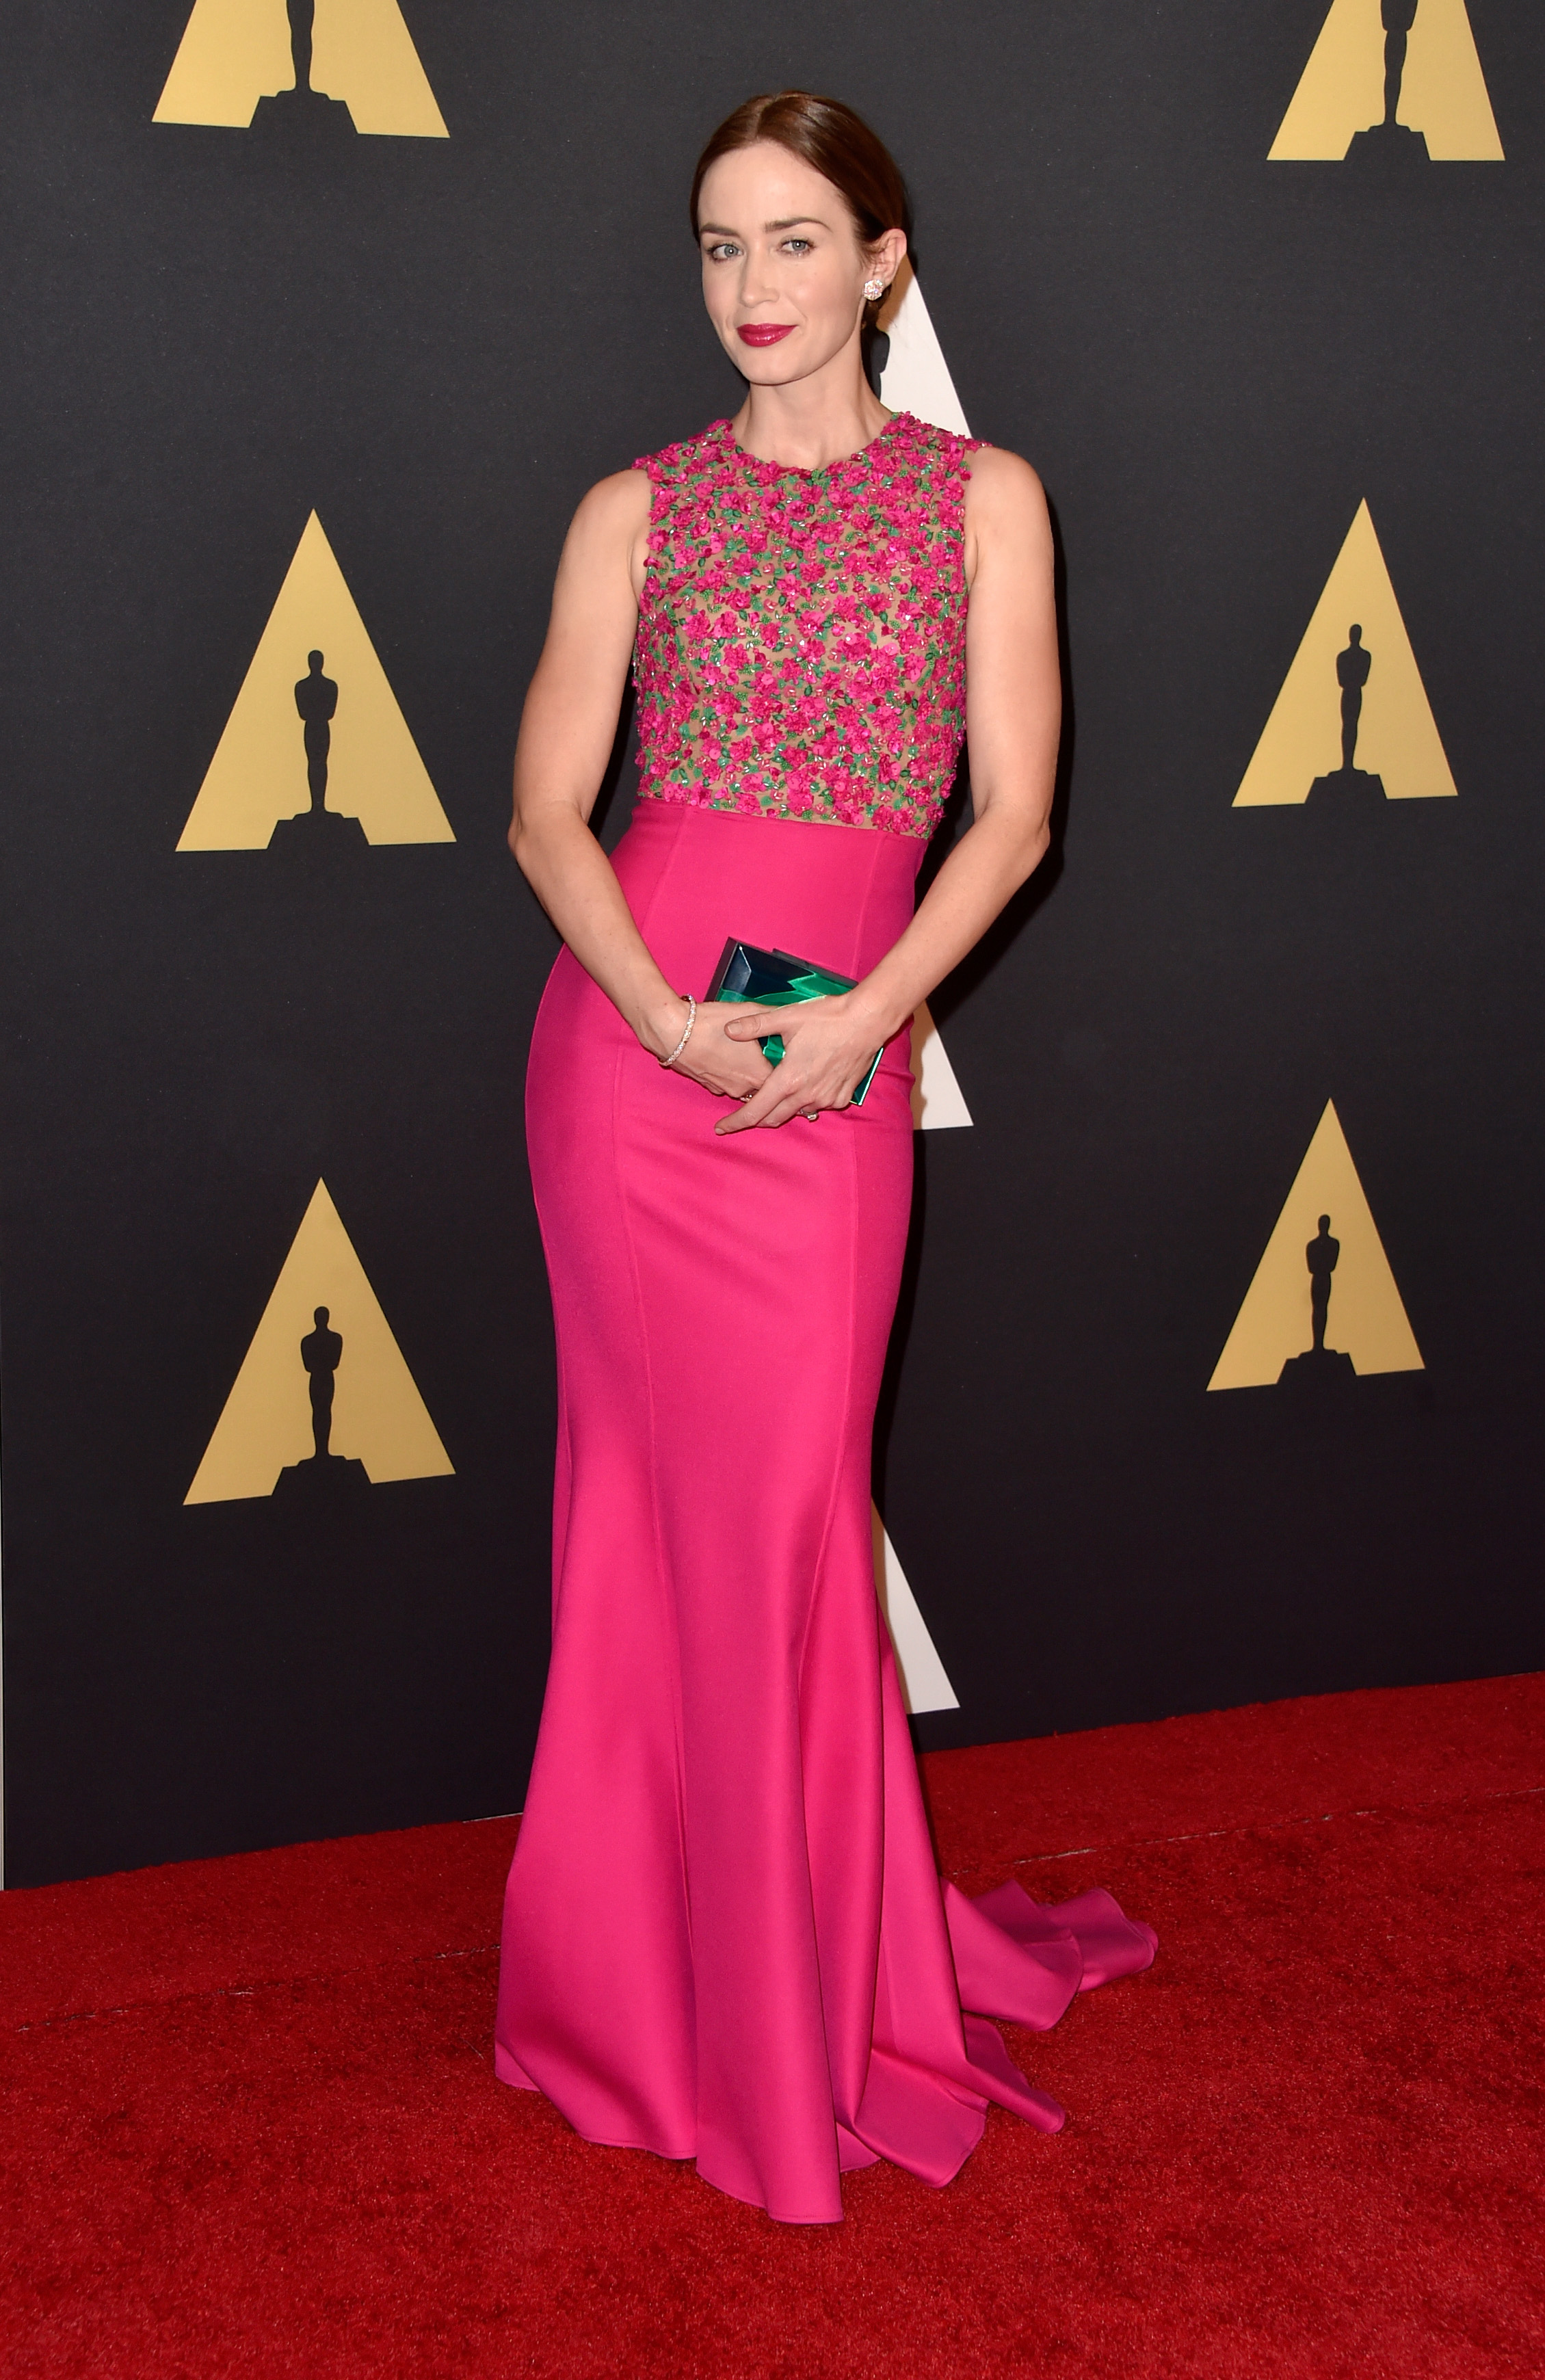 emily-blunt-michael-kors-academy-motion-picture-arts-sciences-governors-awards/